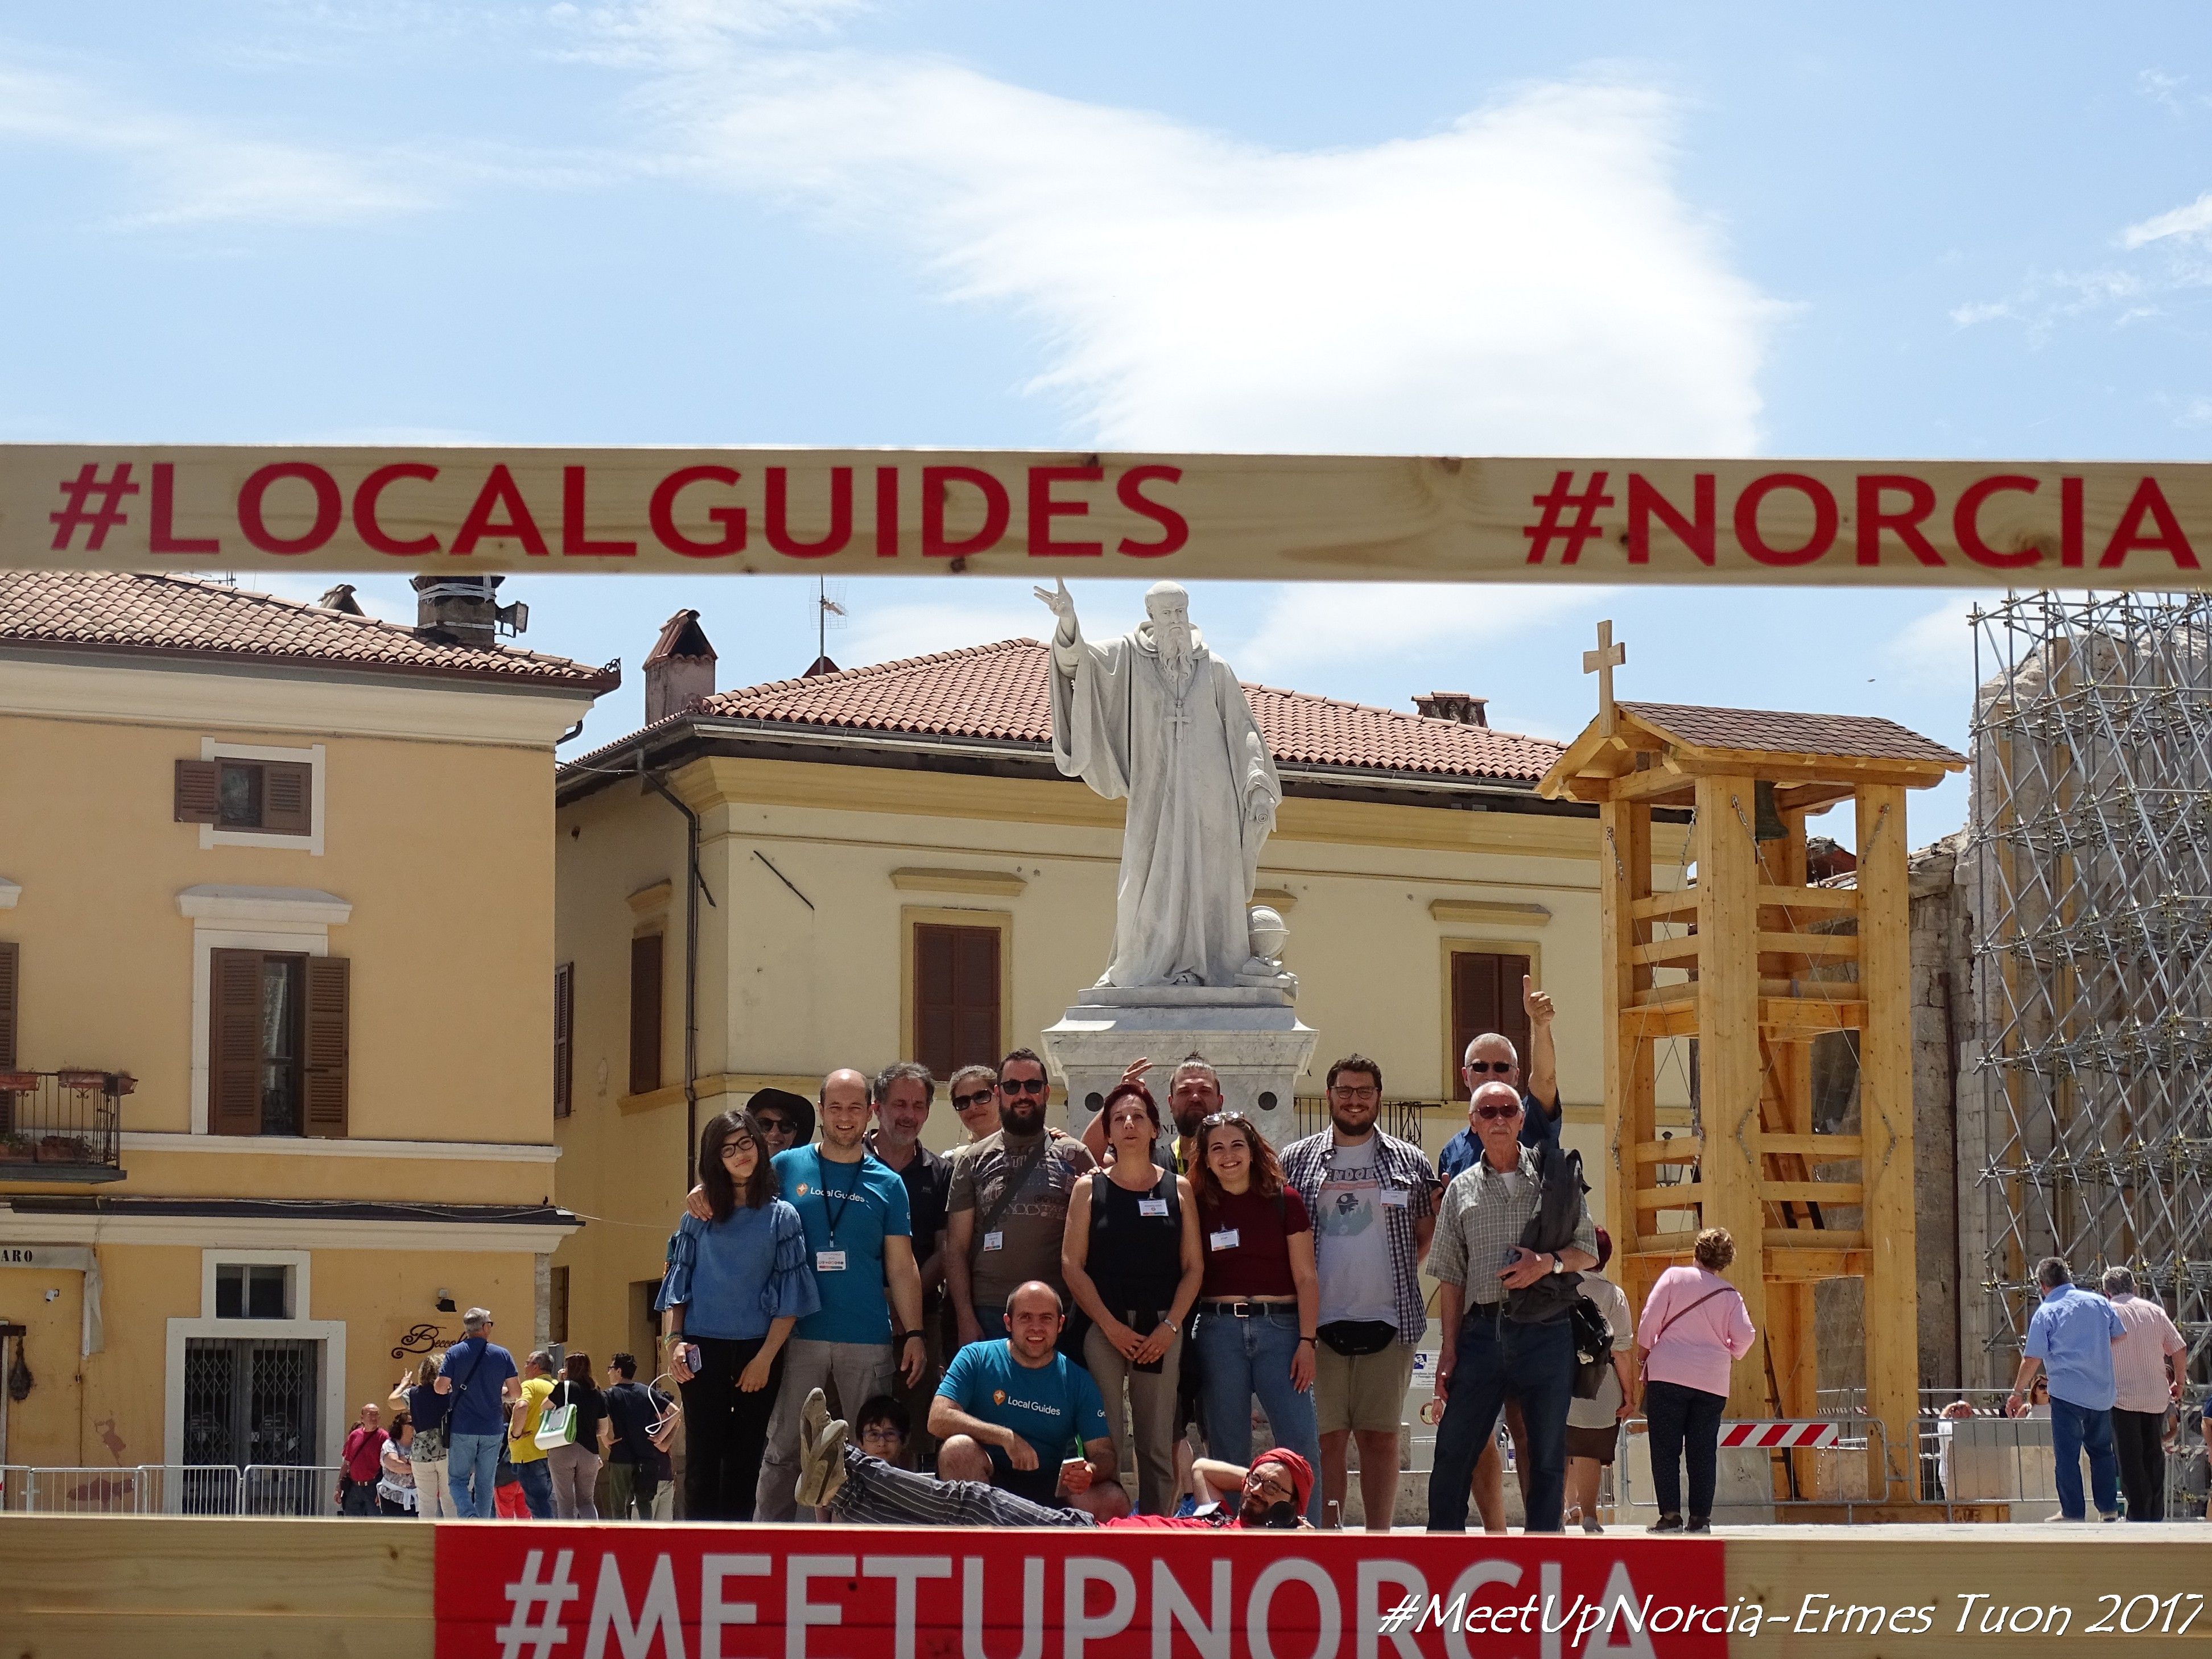 Caption: A group of Italian Local Guides in Norcia, with the Statue of St. Benedict on the background